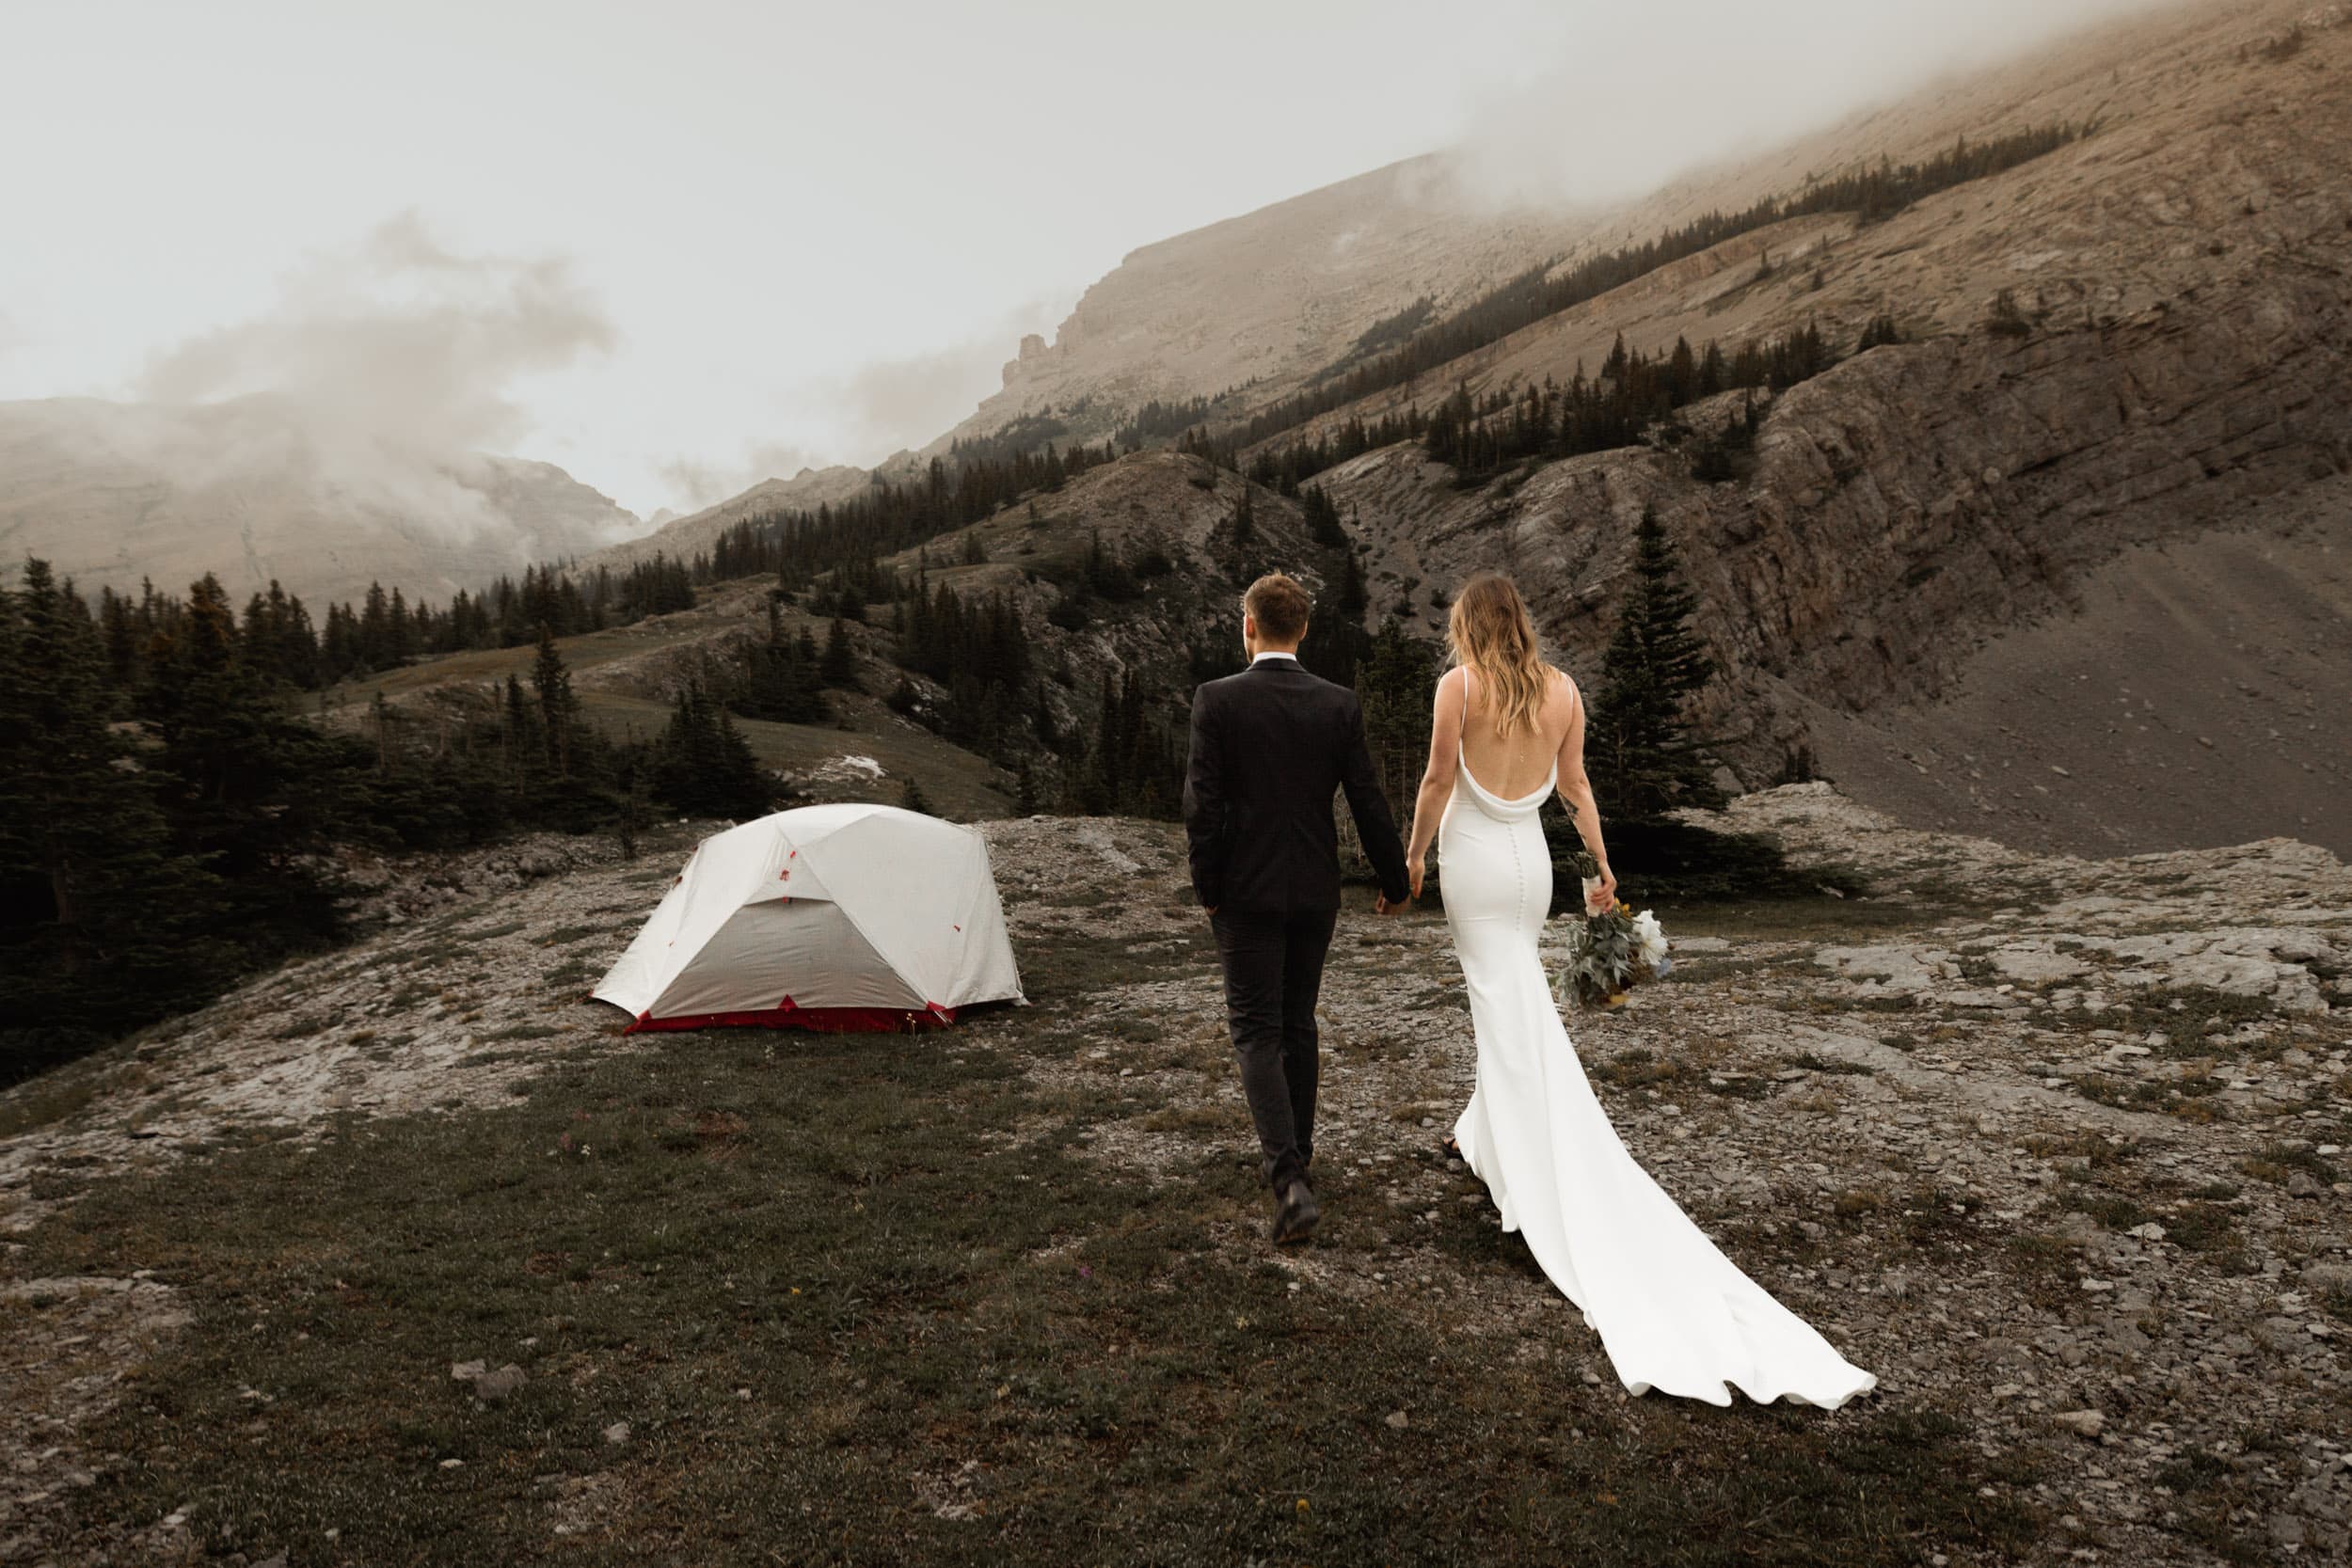 Camping elopement in Banff National Park